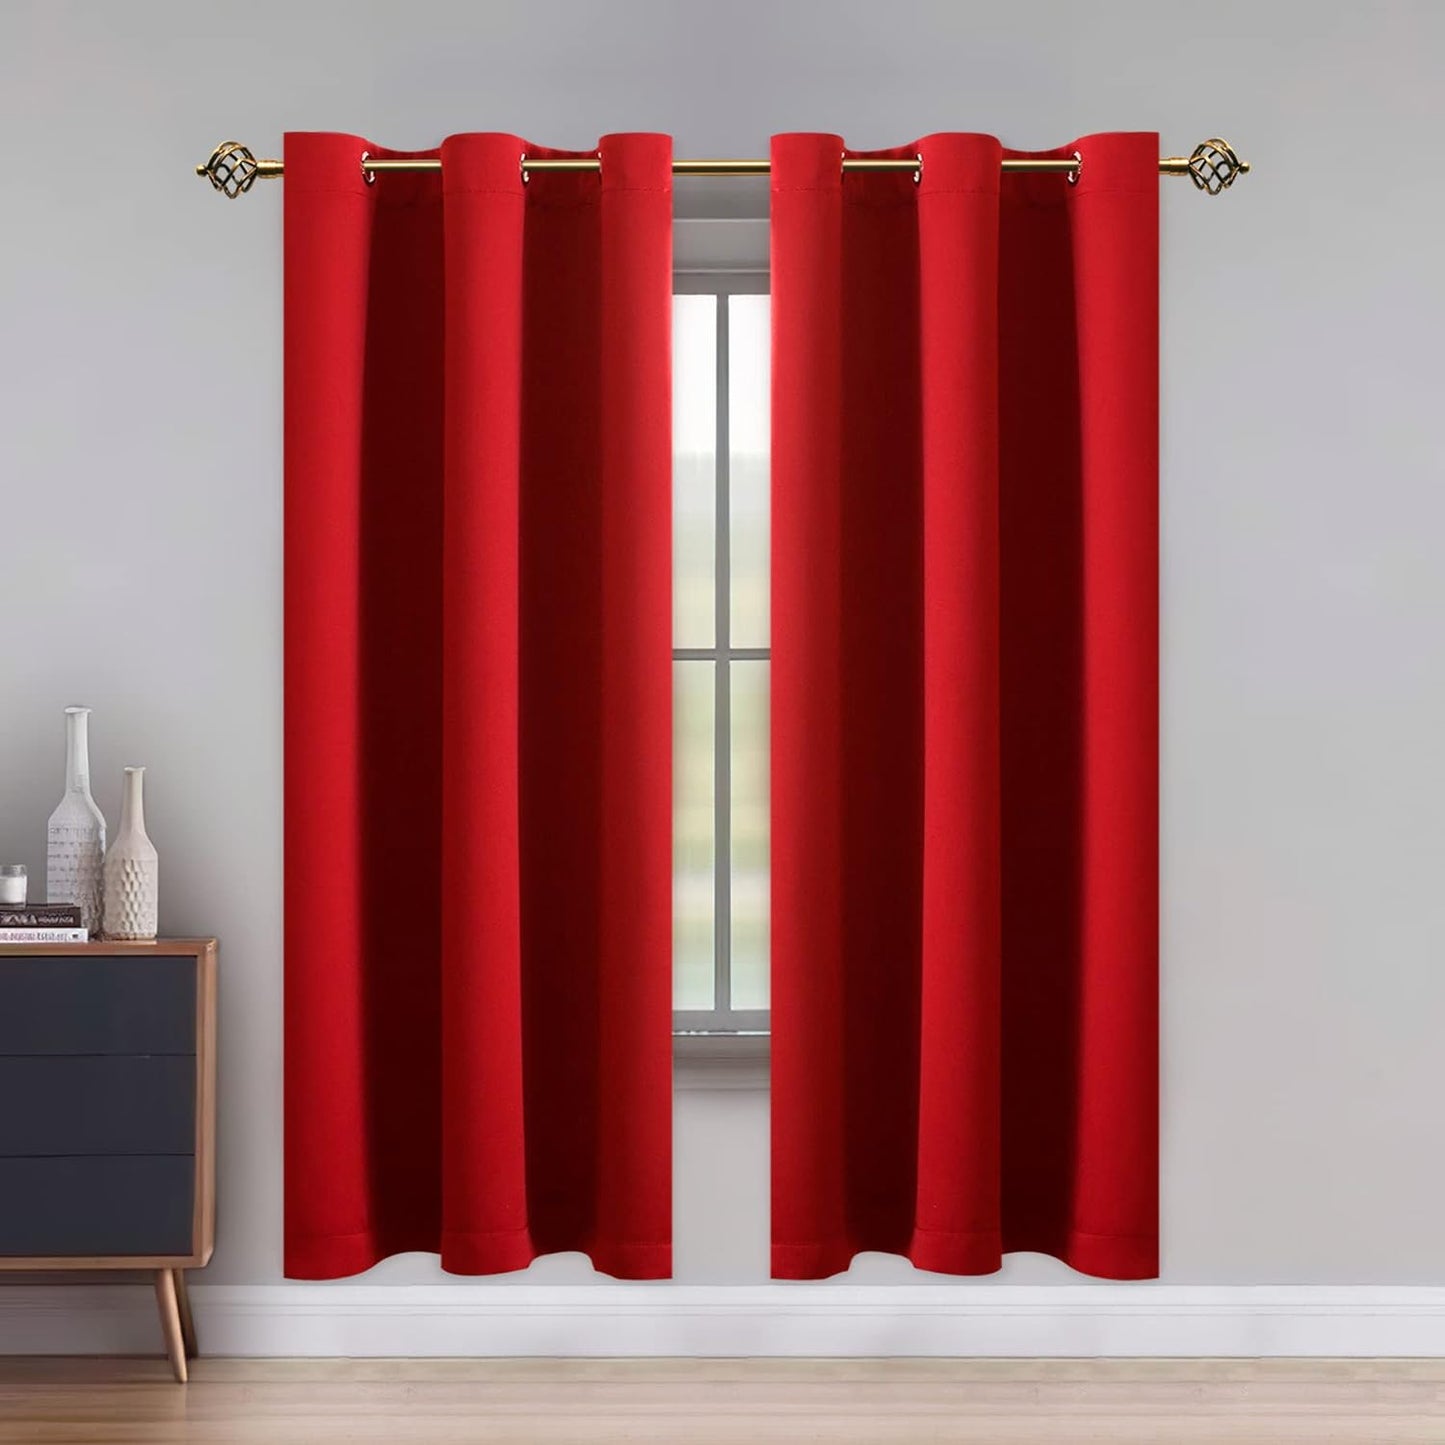 LUSHLEAF Blackout Curtains for Bedroom, Solid Thermal Insulated with Grommet Noise Reduction Window Drapes, Room Darkening Curtains for Living Room, 2 Panels, 52 X 63 Inch Grey  SHEEROOM Red 42 X 72 Inch 